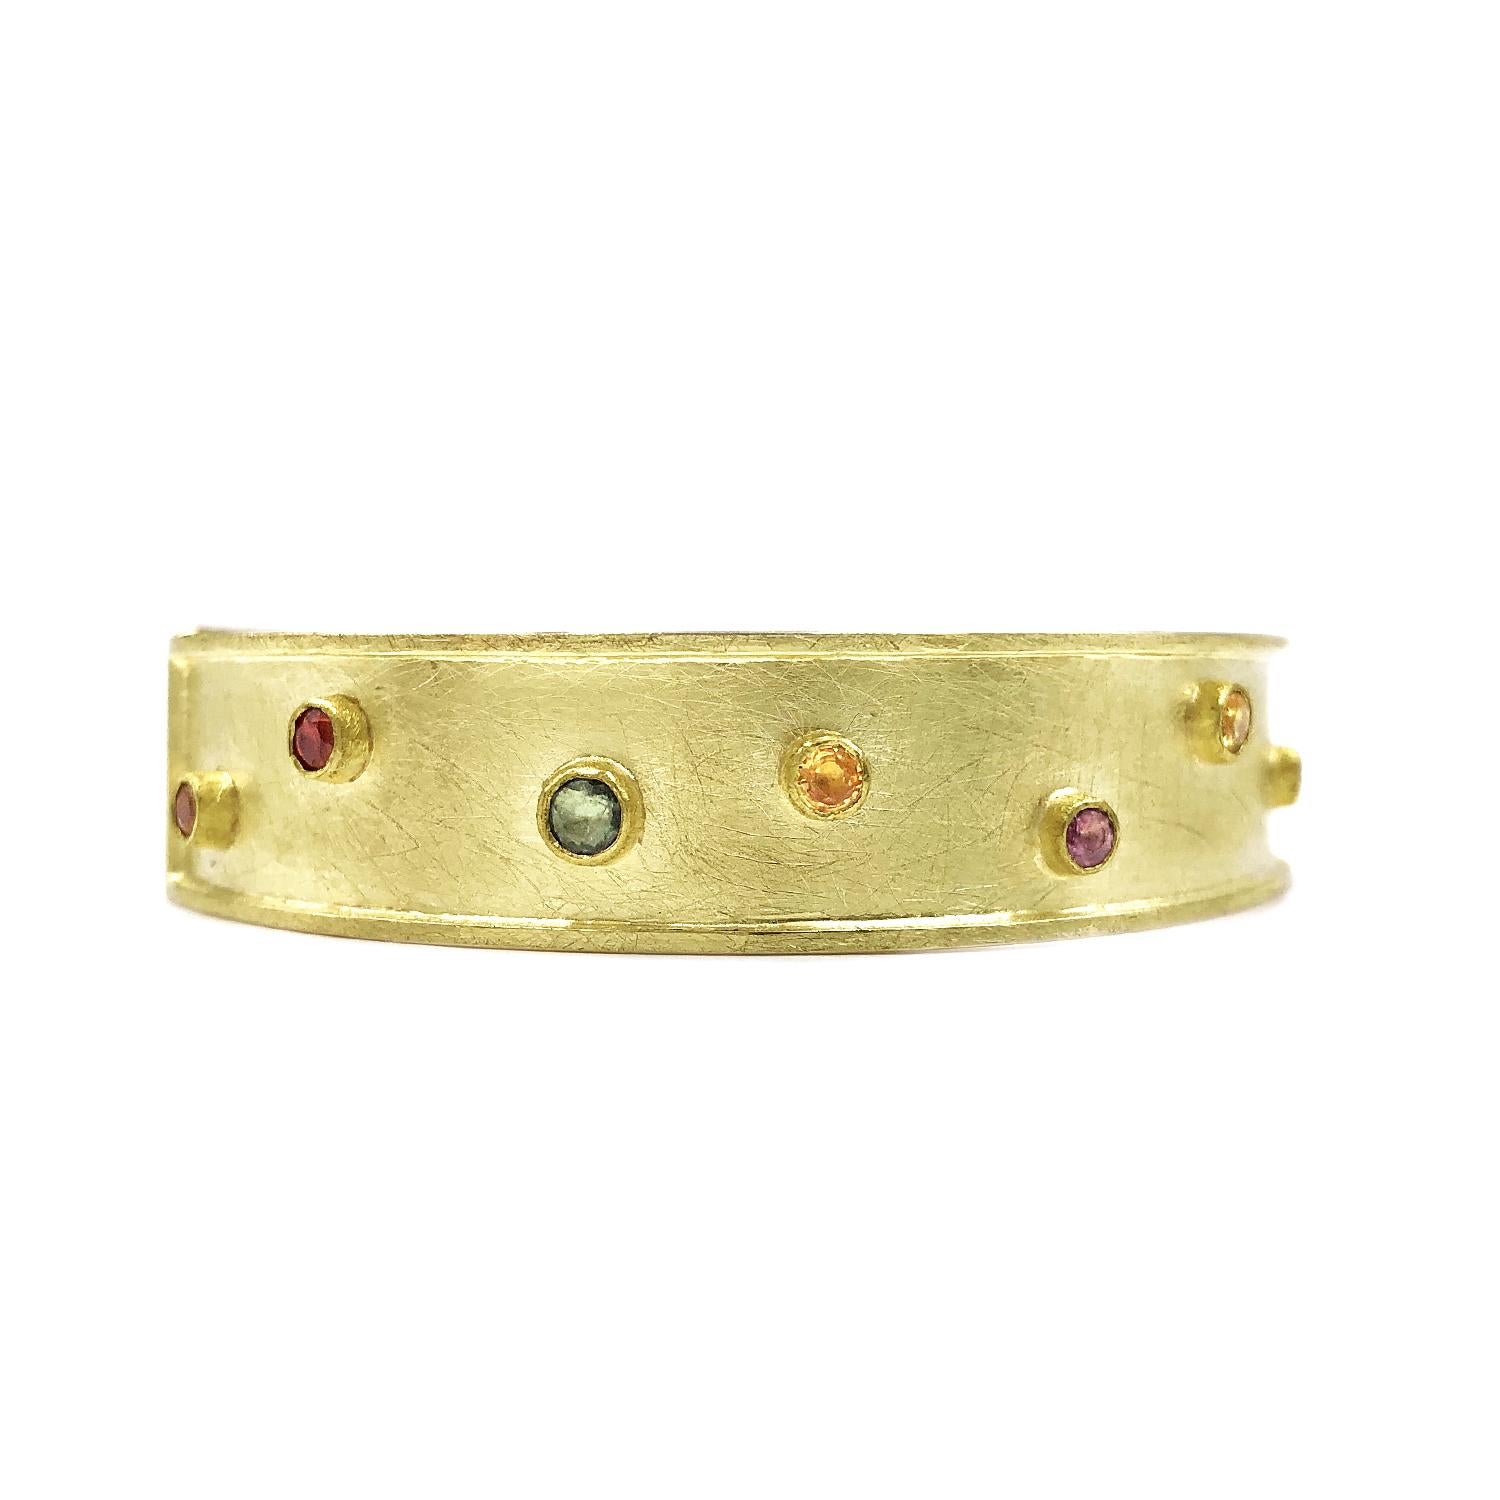 One of a Kind Dots Bracelet handcrafted by acclaimed jewelry maker Petra Class in a combination of signature-finished 22k yellow gold and 18k yellow gold featuring 2.50 total carats of assorted faceted round multicolored sapphires. 12mm width.